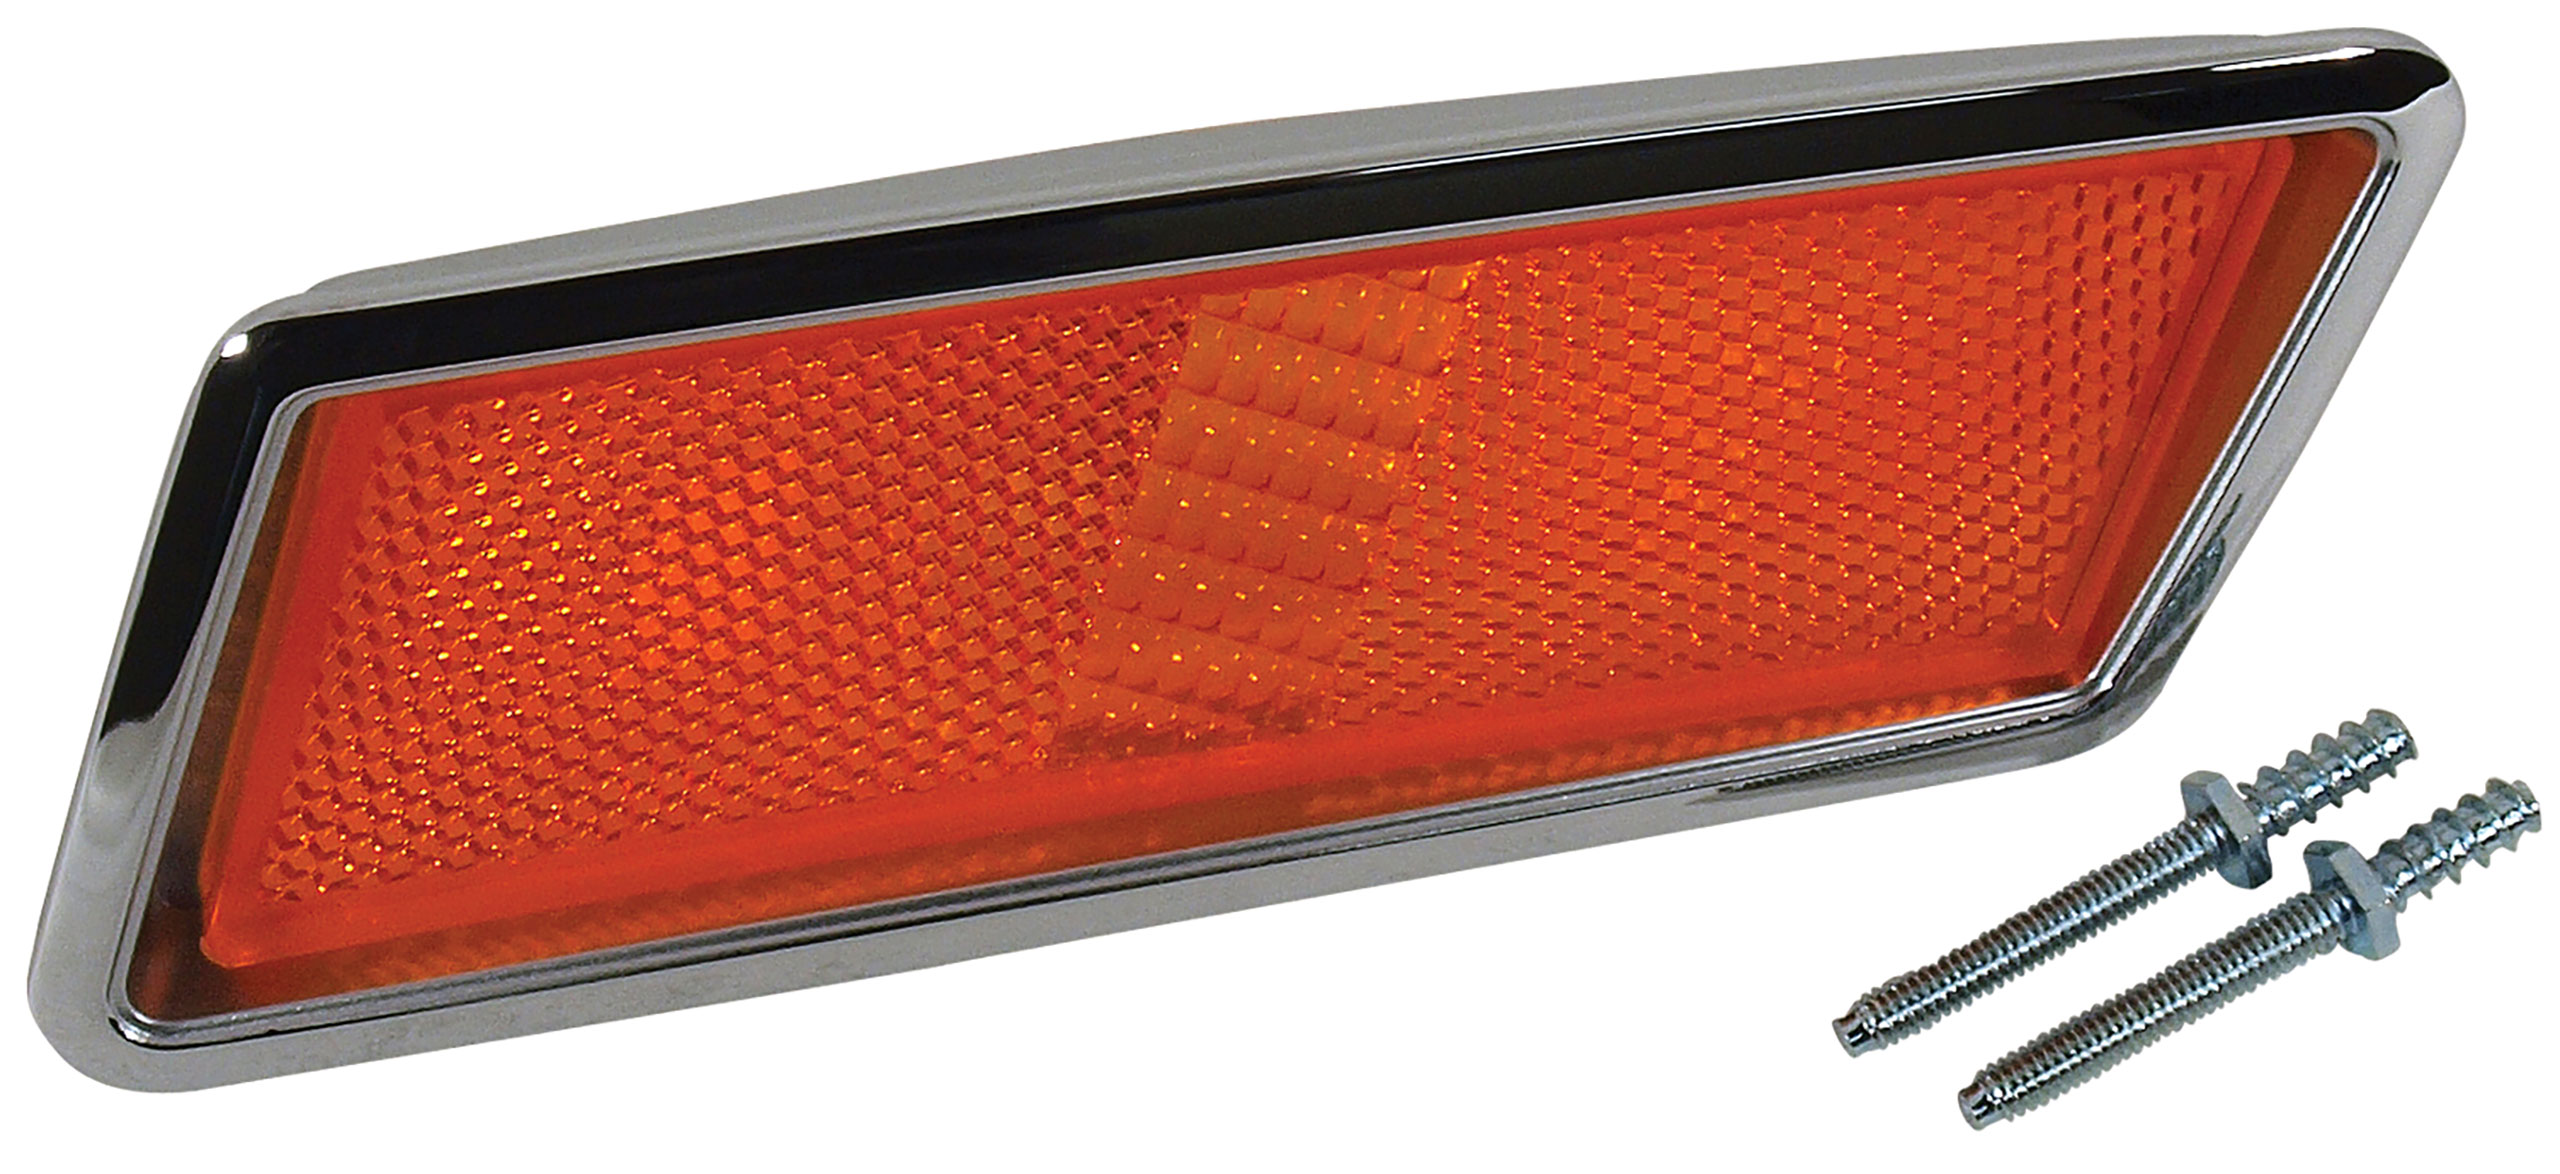 First Generation 1970 Ford Mustang Side Marker Light Assembly - Left Front - ACP